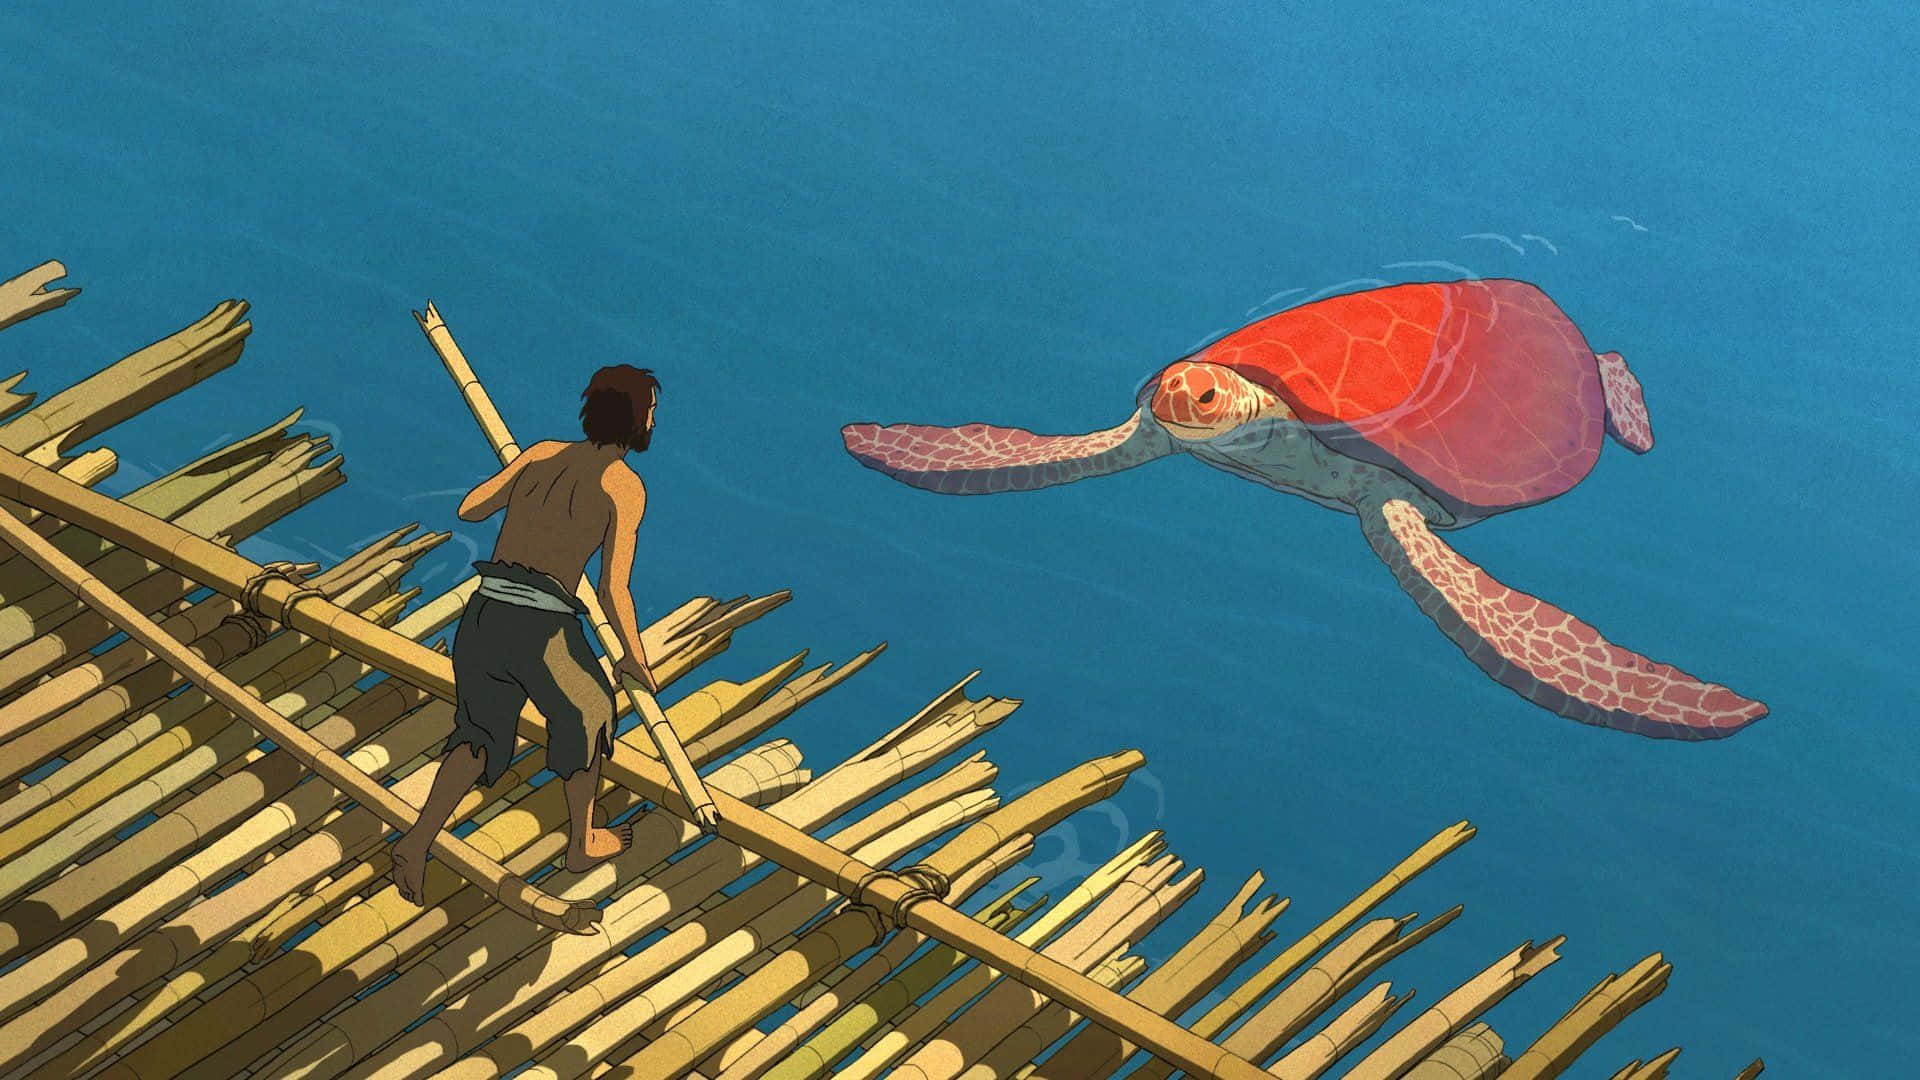 The Red Turtle - Magical Encounter on the Beach Wallpaper